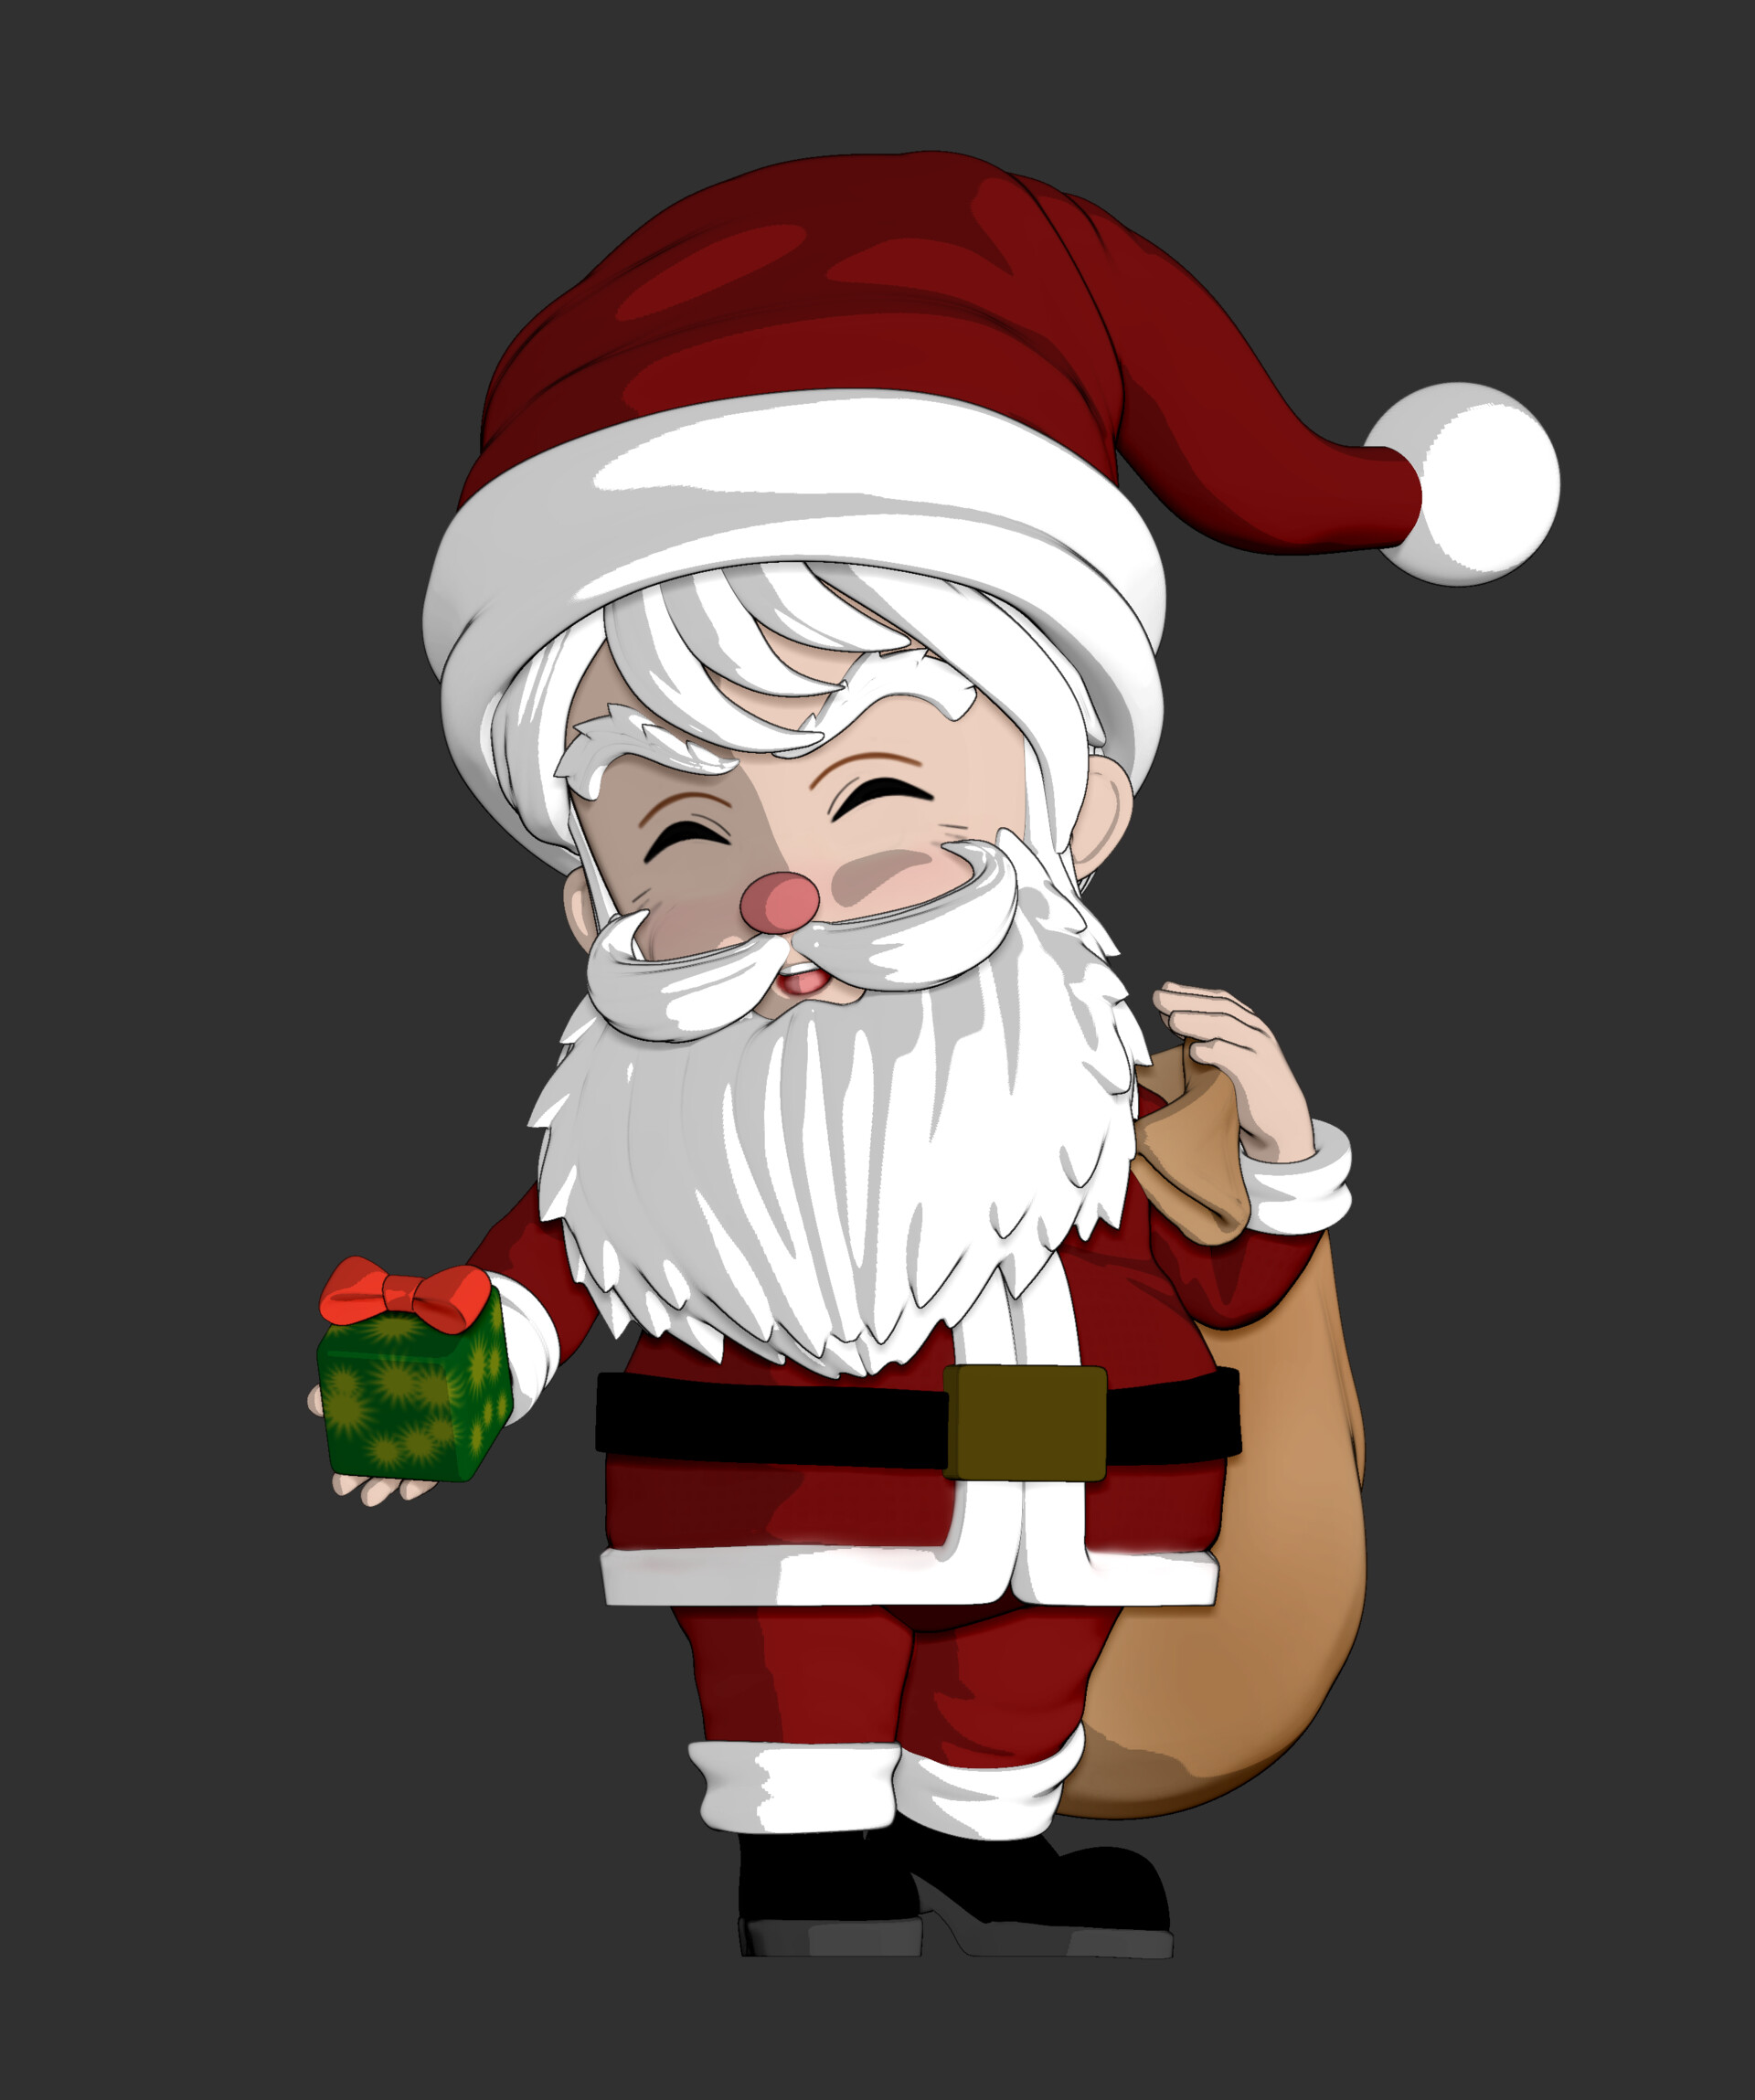 All done with the Santa Claus drawing. : r/gaybros